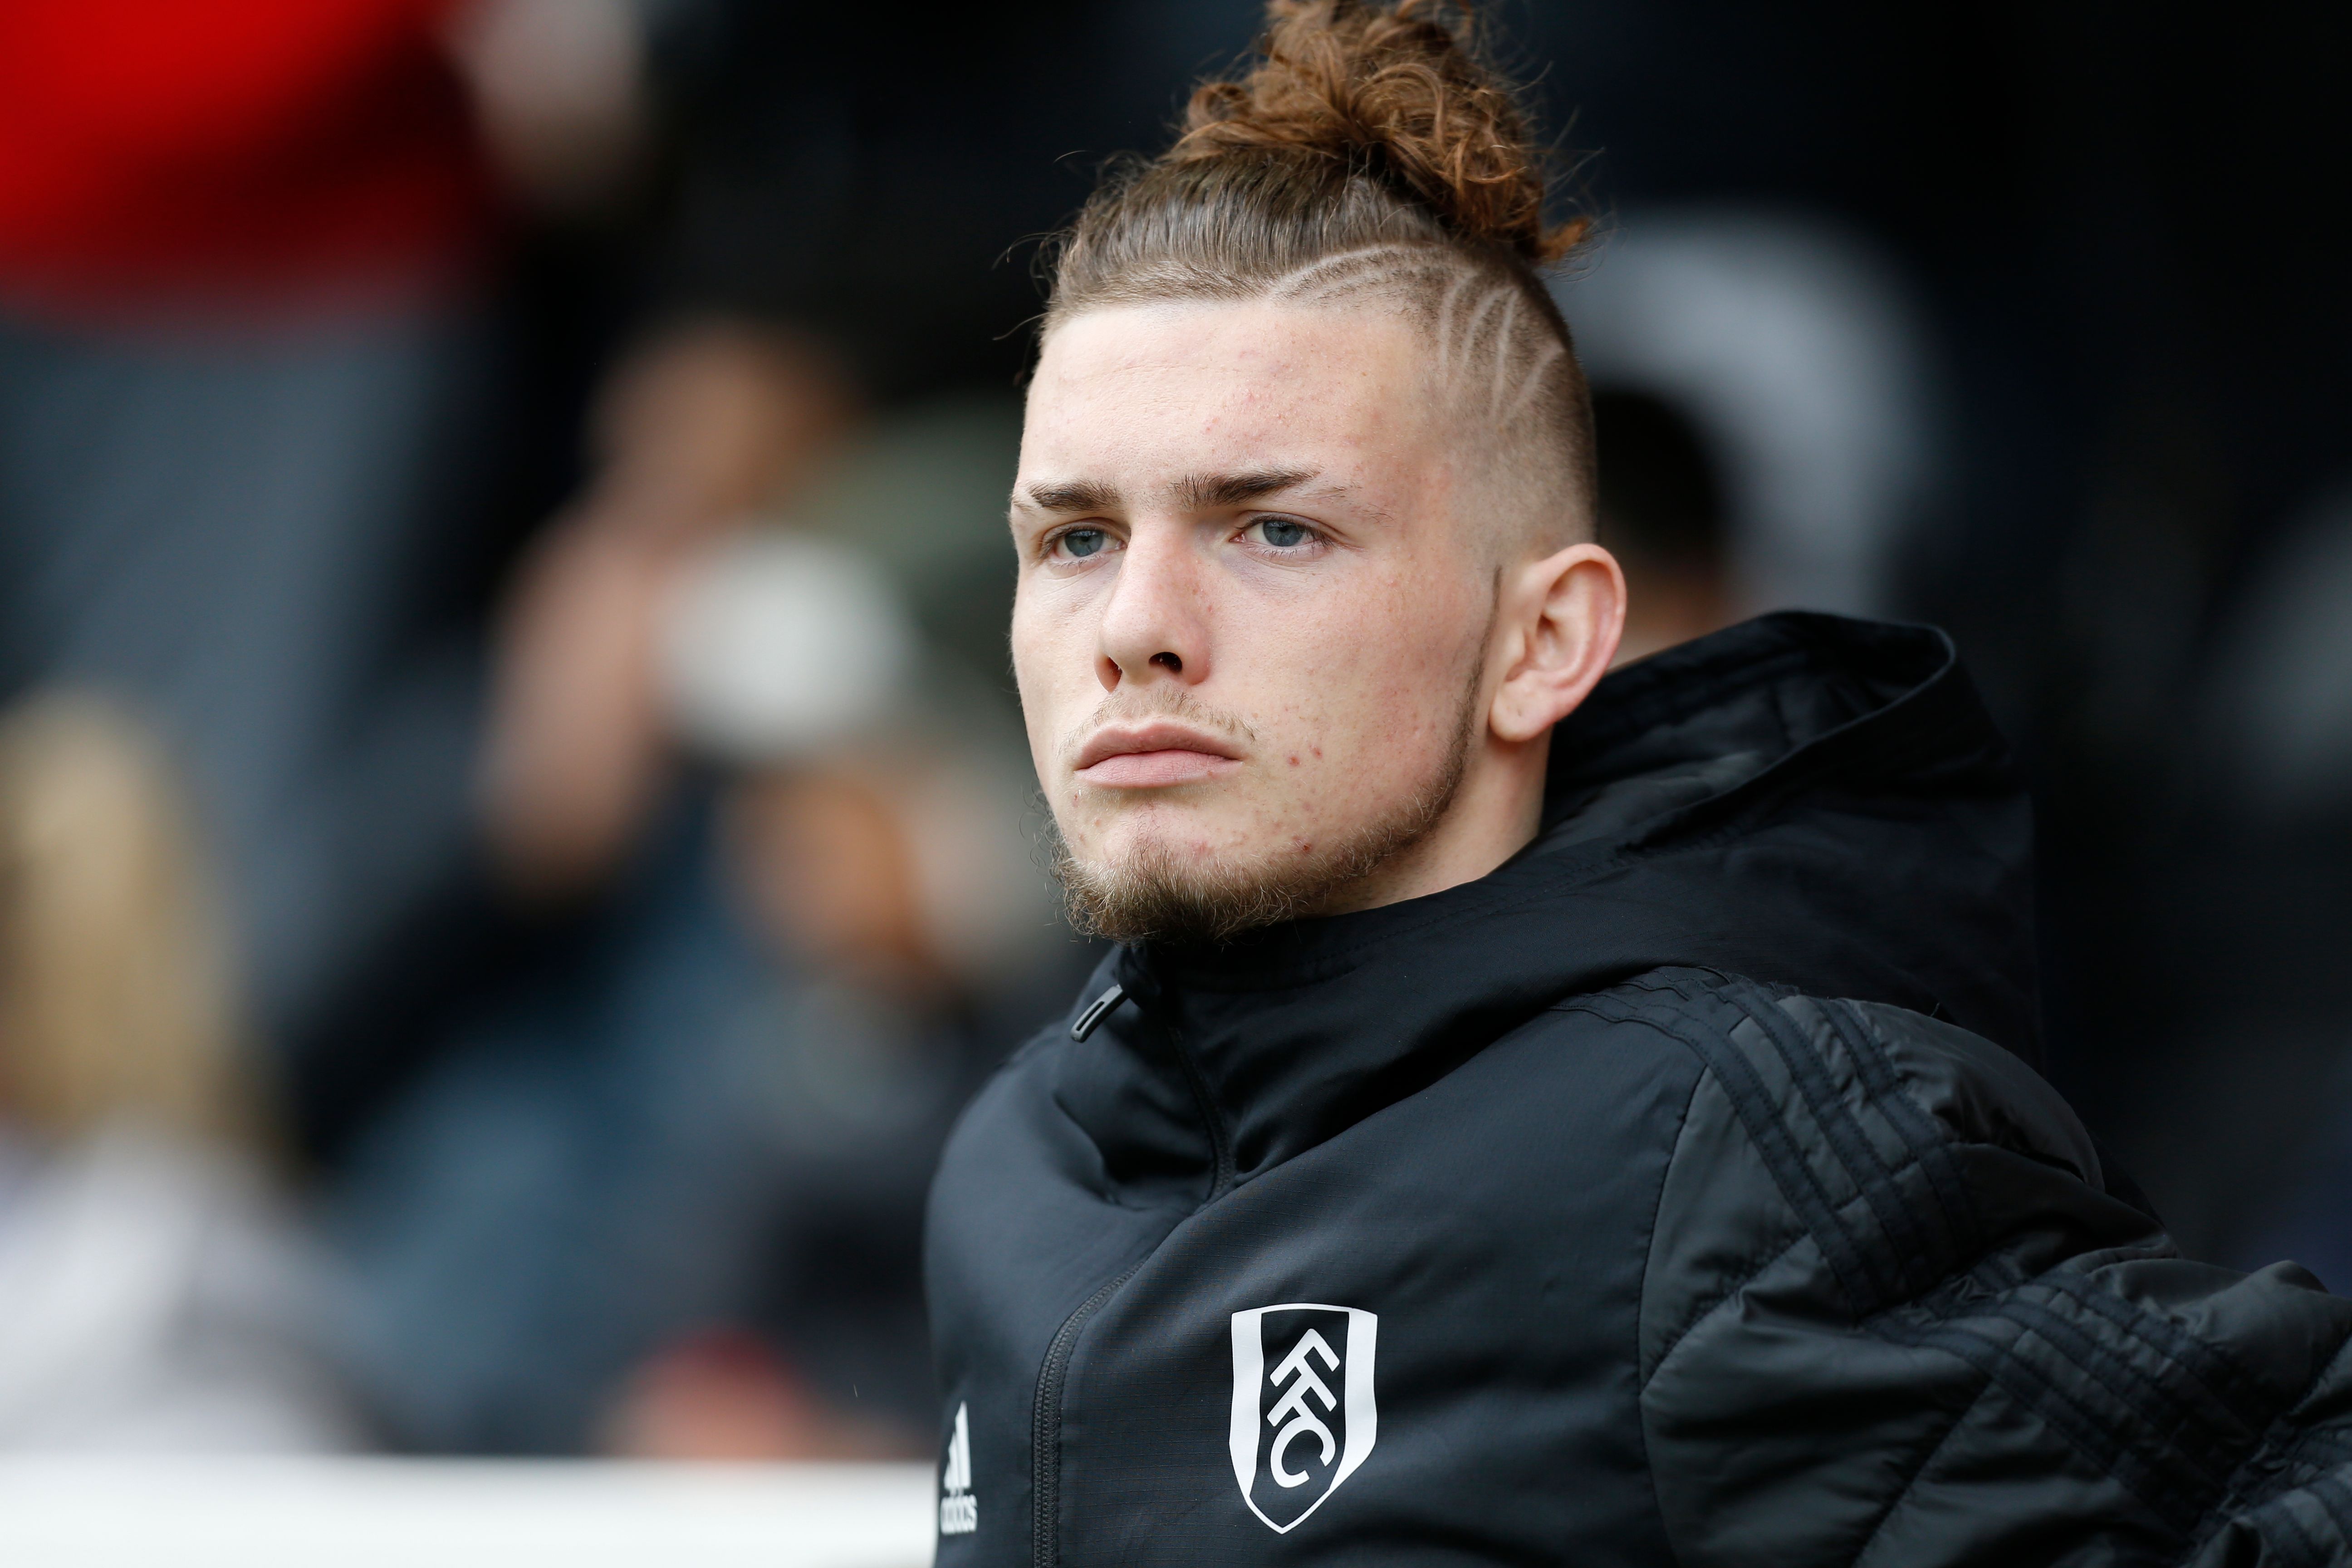 Fulham's 16-year-old player Harvey Elliott takes his place on the bench for the English Premier League football match between Fulham and Cardiff City at Craven Cottage in London on April 27, 2019. (Photo by Ian KINGTON / AFP) / RESTRICTED TO EDITORIAL USE. No use with unauthorized audio, video, data, fixture lists, club/league logos or 'live' services. Online in-match use limited to 120 images. An additional 40 images may be used in extra time. No video emulation. Social media in-match use limited to 120 images. An additional 40 images may be used in extra time. No use in betting publications, games or single club/league/player publications. /         (Photo credit should read IAN KINGTON/AFP/Getty Images)